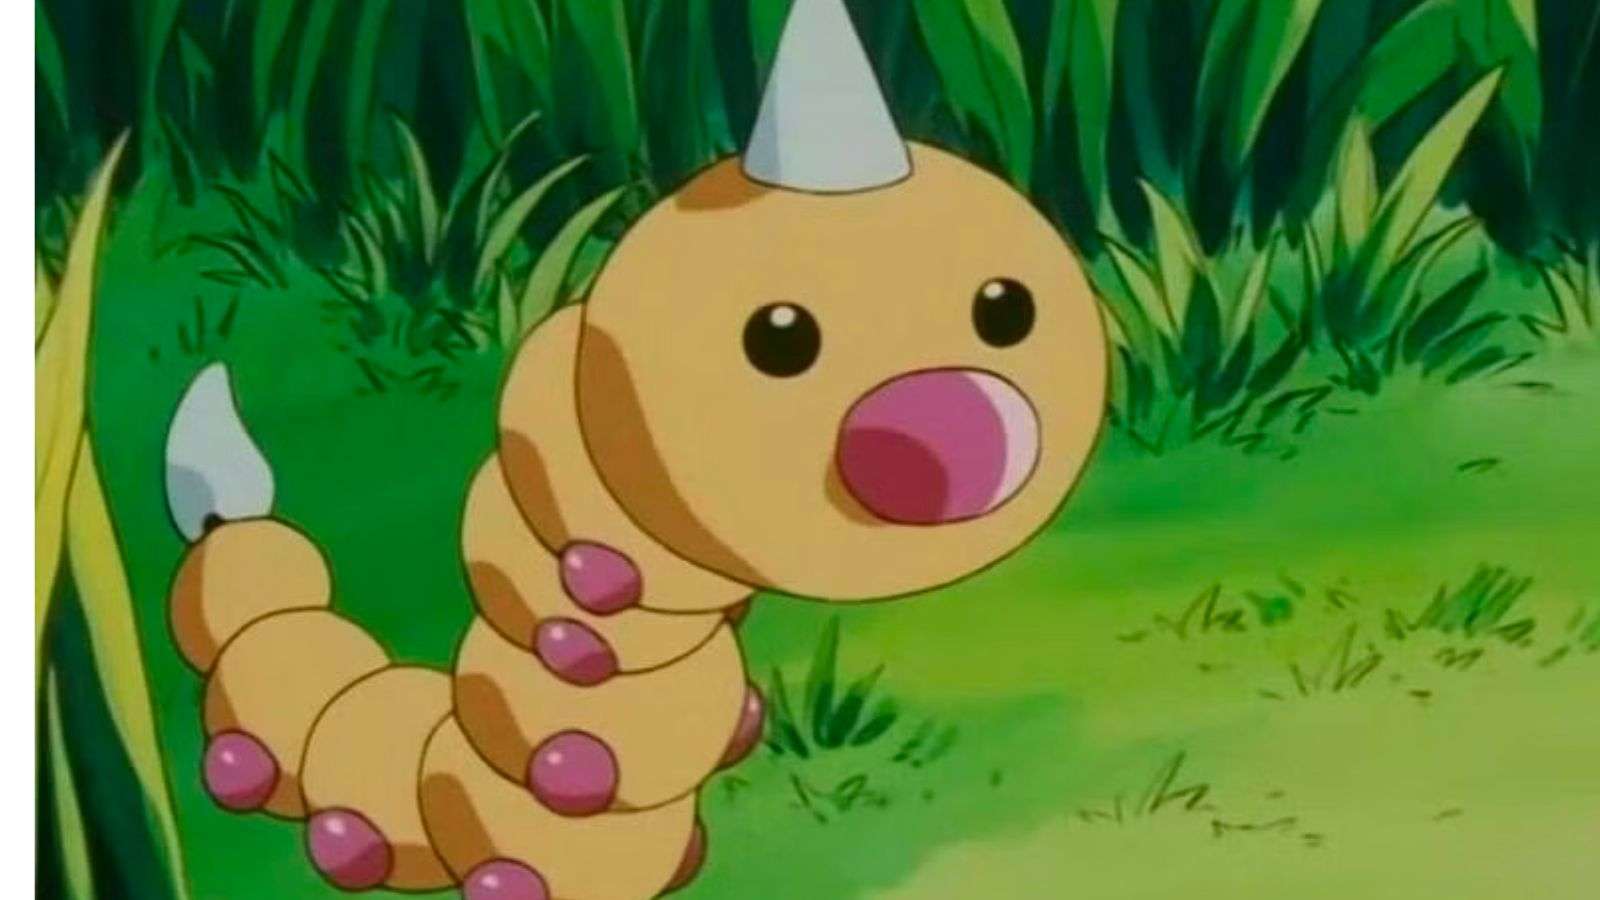 A Weedle in Pokemon anime